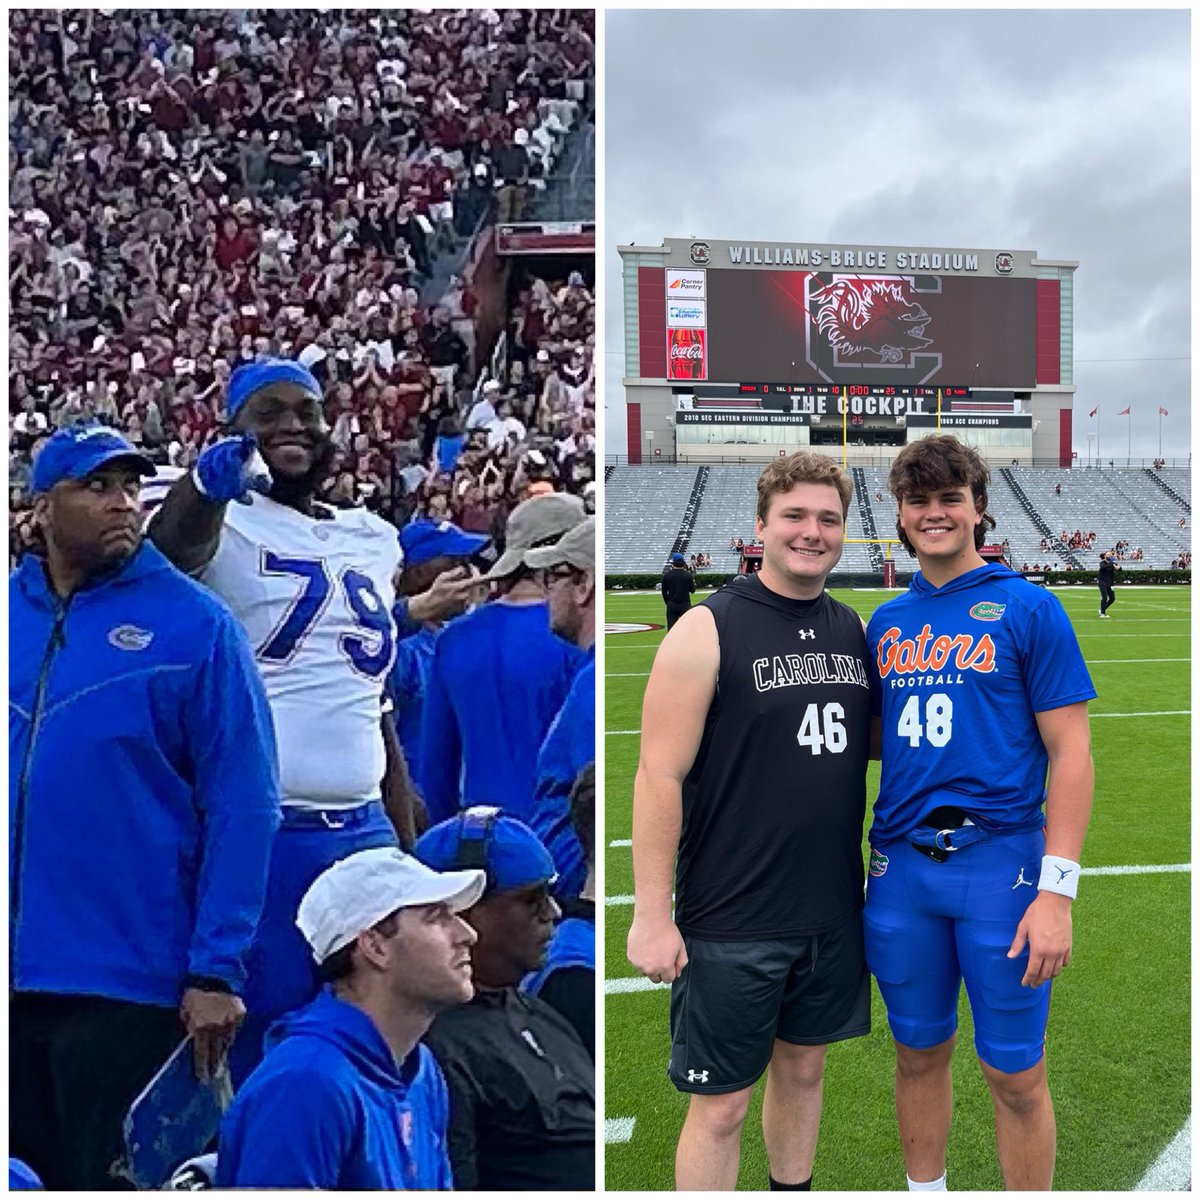 Super proud of these former Jackets! Mixing it up on the SEC Gridiron today!!